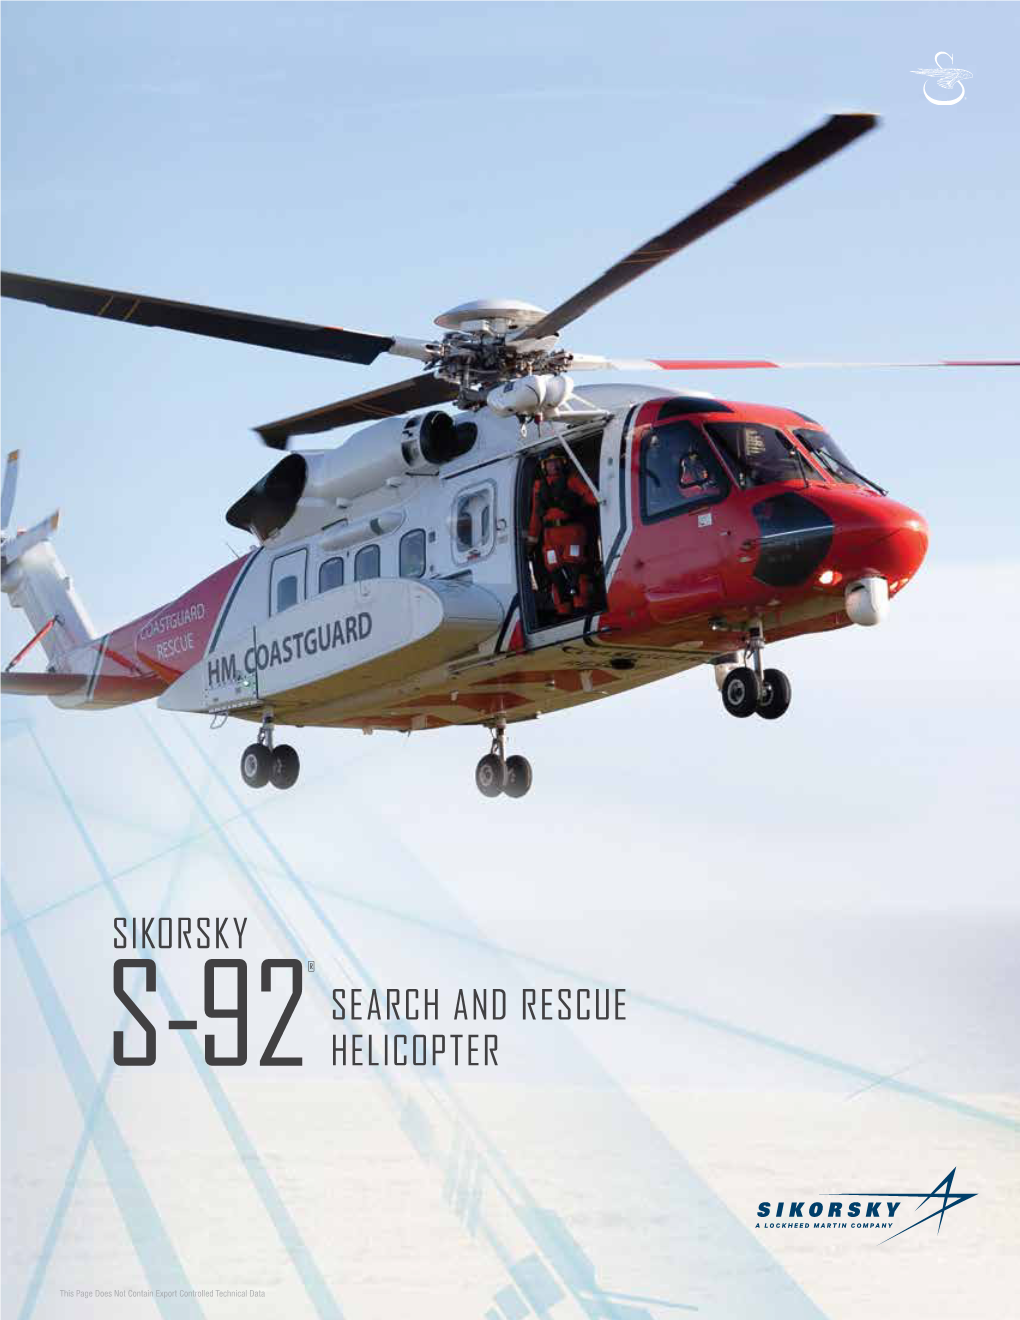 Sikorsky Search and Rescue Helicopter